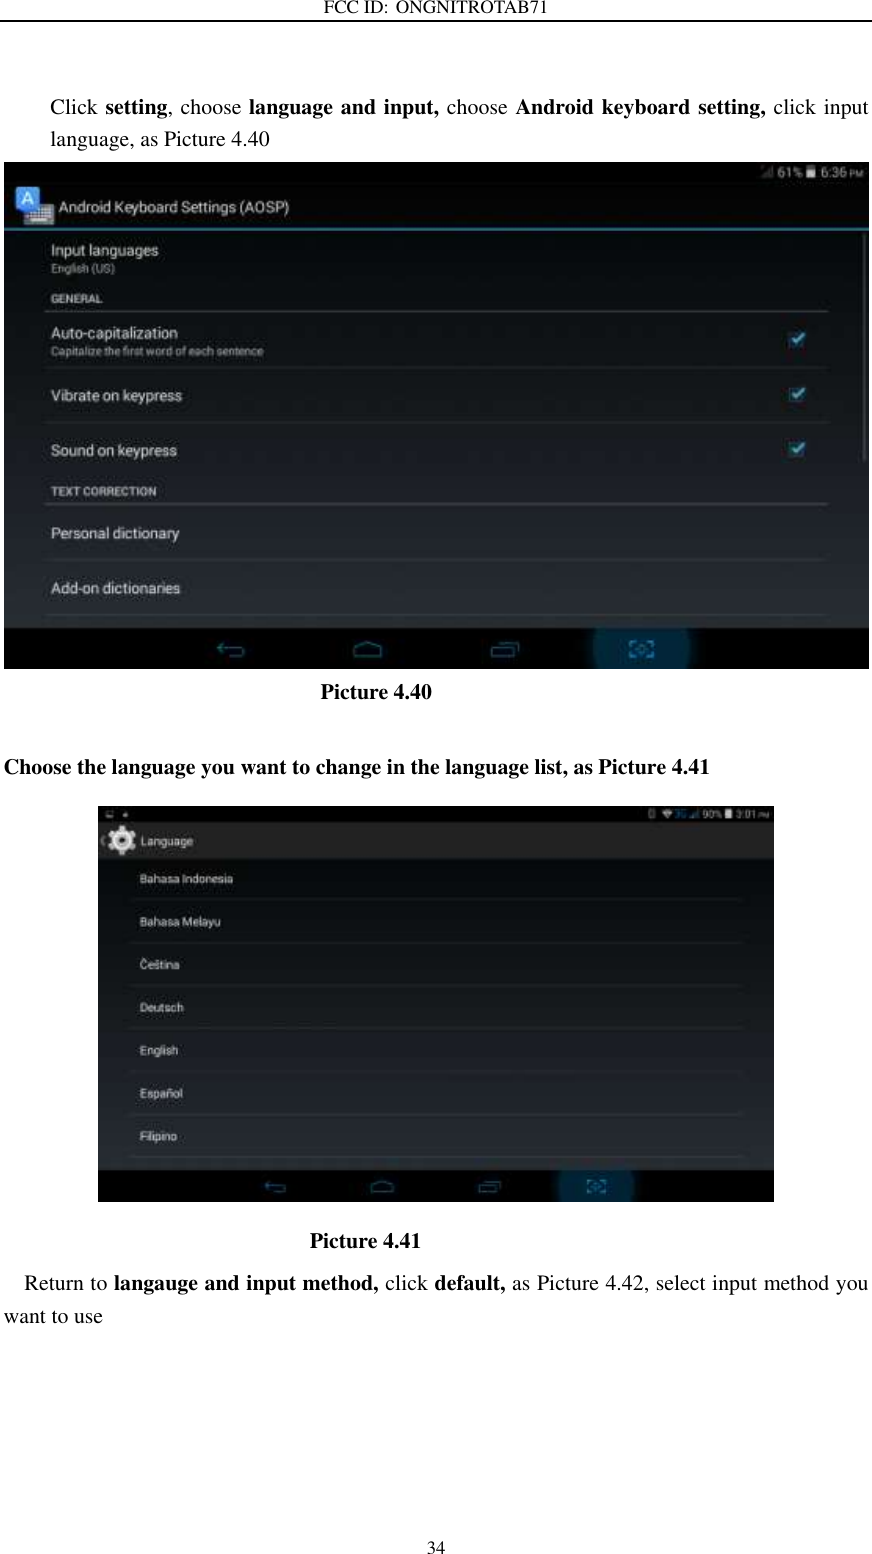 FCC ID: ONGNITROTAB71   34  Click setting, choose language and input, choose Android keyboard setting, click input language, as Picture 4.40                               Picture 4.40  Choose the language you want to change in the language list, as Picture 4.41                                                          Picture 4.41 Return to langauge and input method, click default, as Picture 4.42, select input method you want to use 